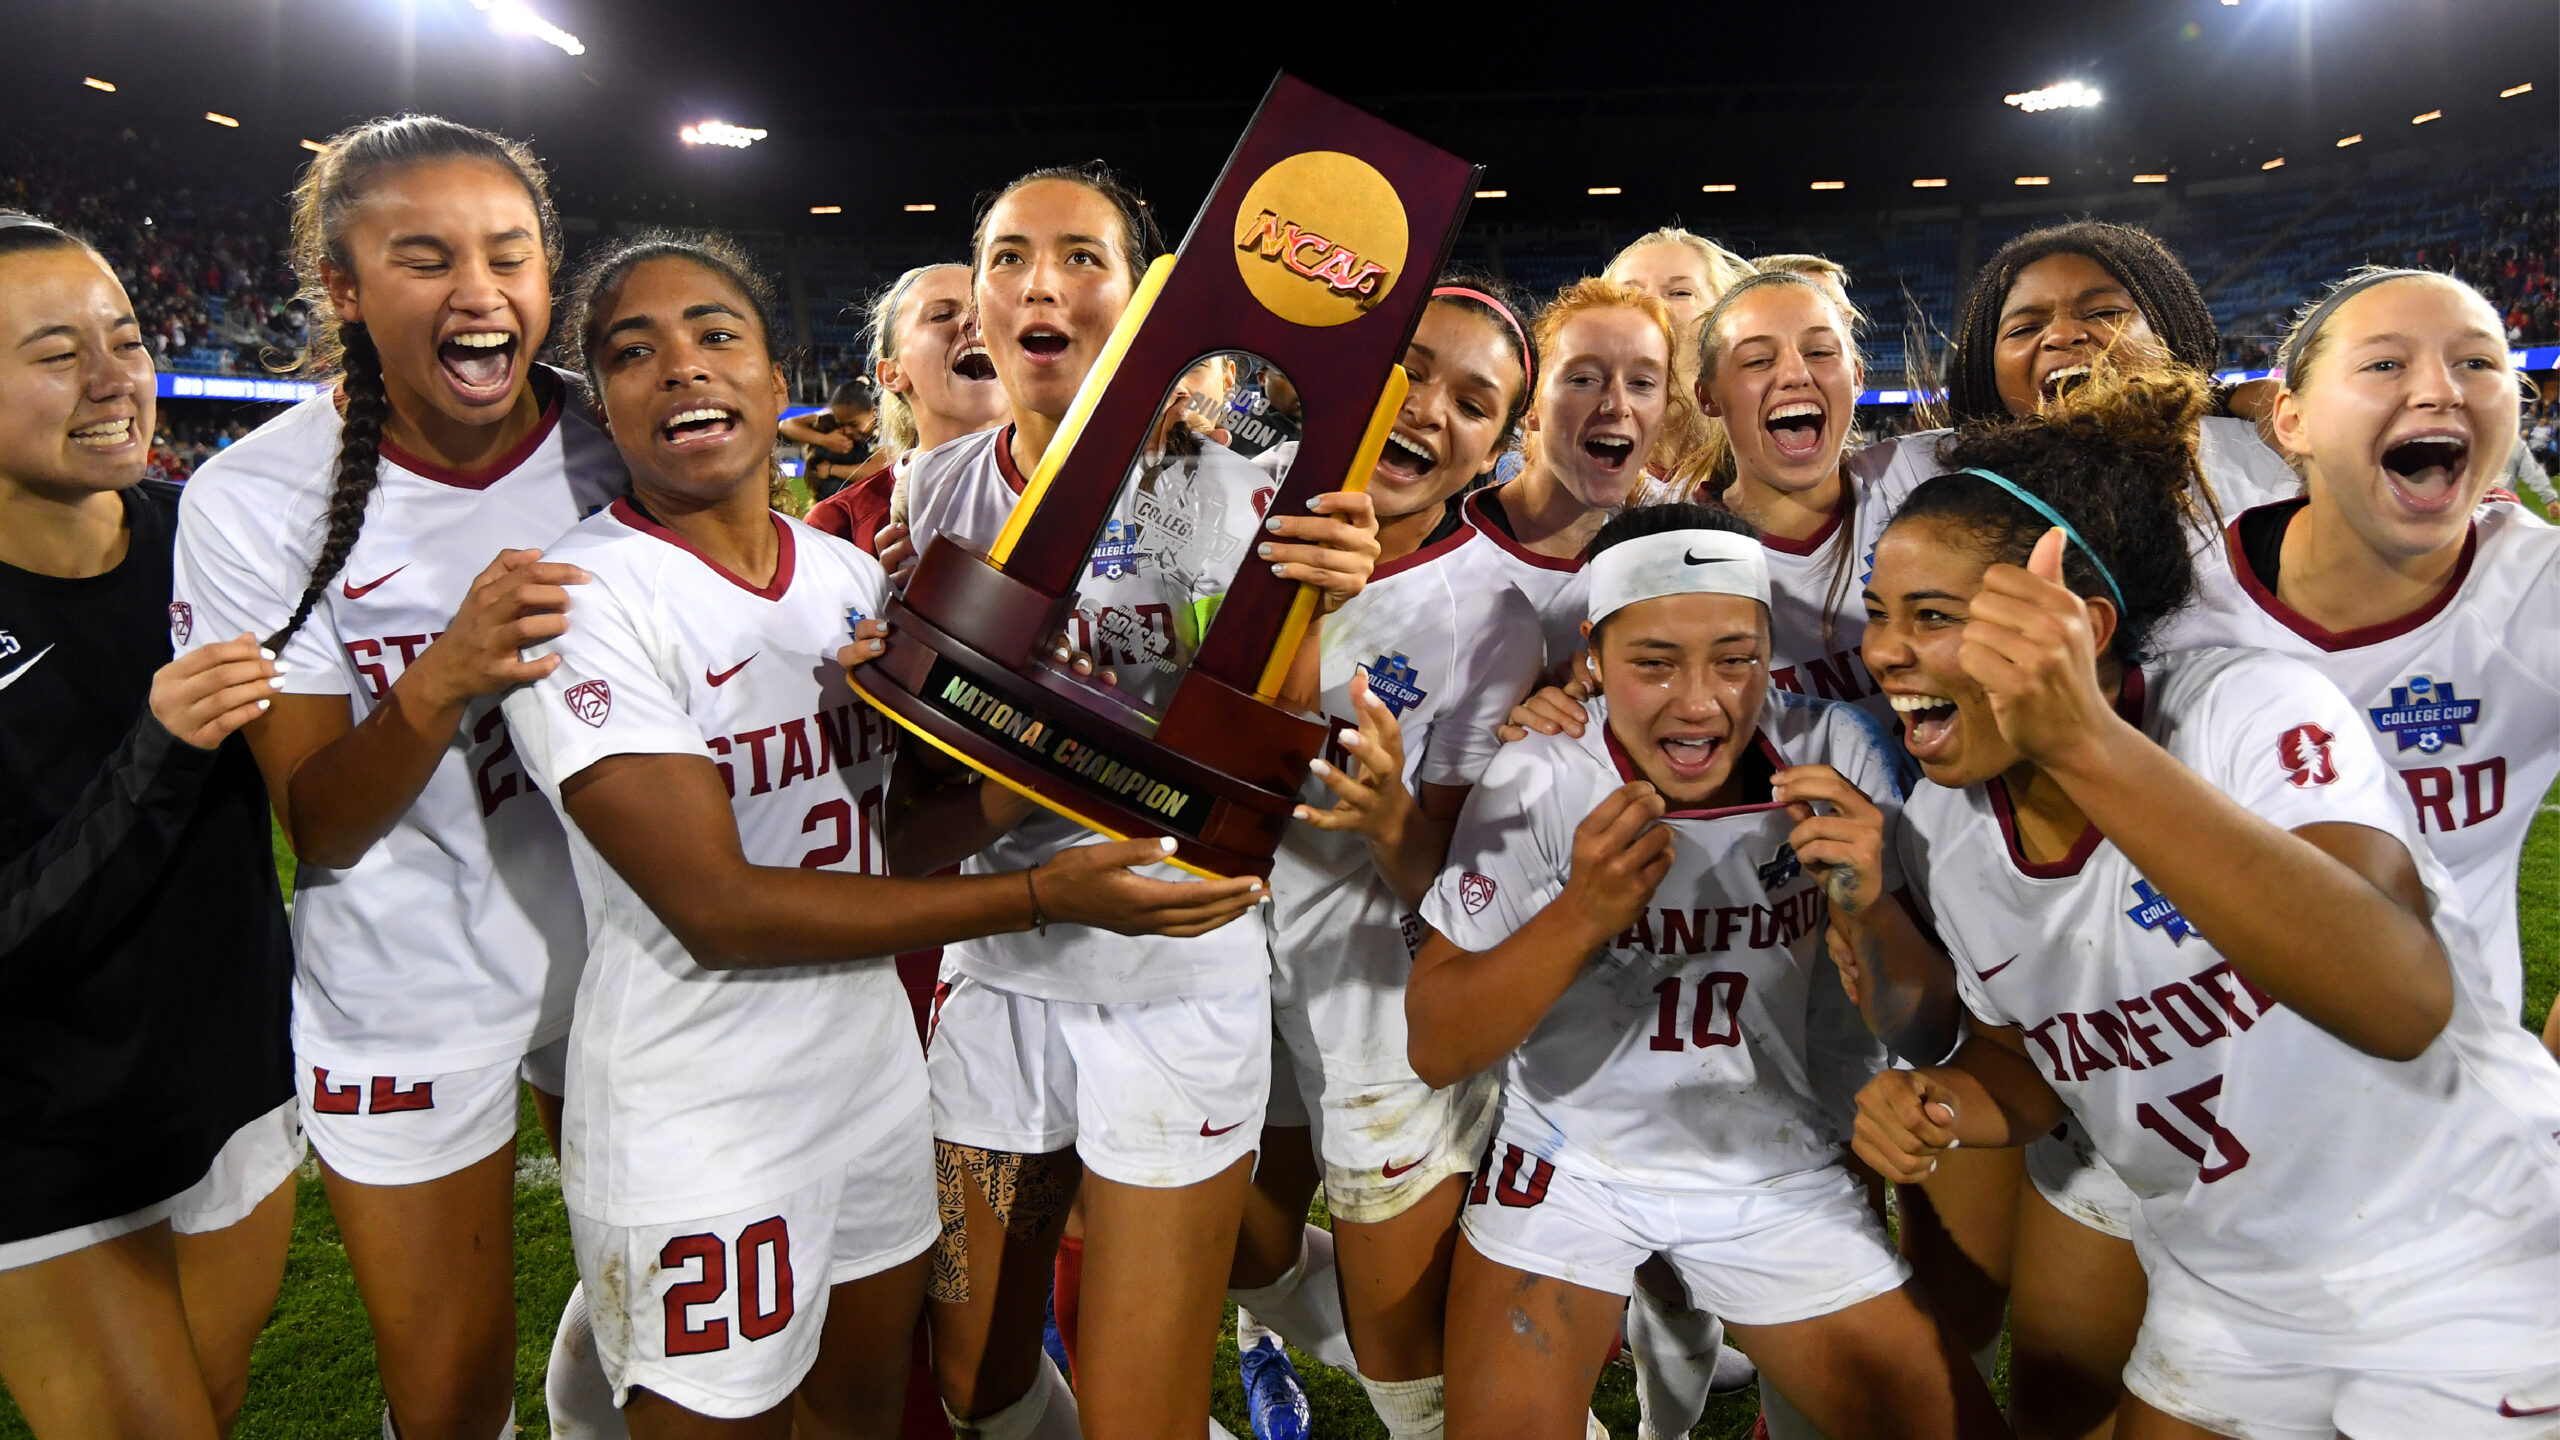 SAN JOSE, CA - DECEMBER 08: Stanford Cardinal players celebrate their victory against the North Carolina Tar Heels in the Division I Women's Soccer Championship held at Avaya Stadium on December 8, 2019 in San Jose, California. Stanford defeated North Carolina in a shootout. (Photo by Jamie Schwaberow/NCAA Photos via Getty Images)